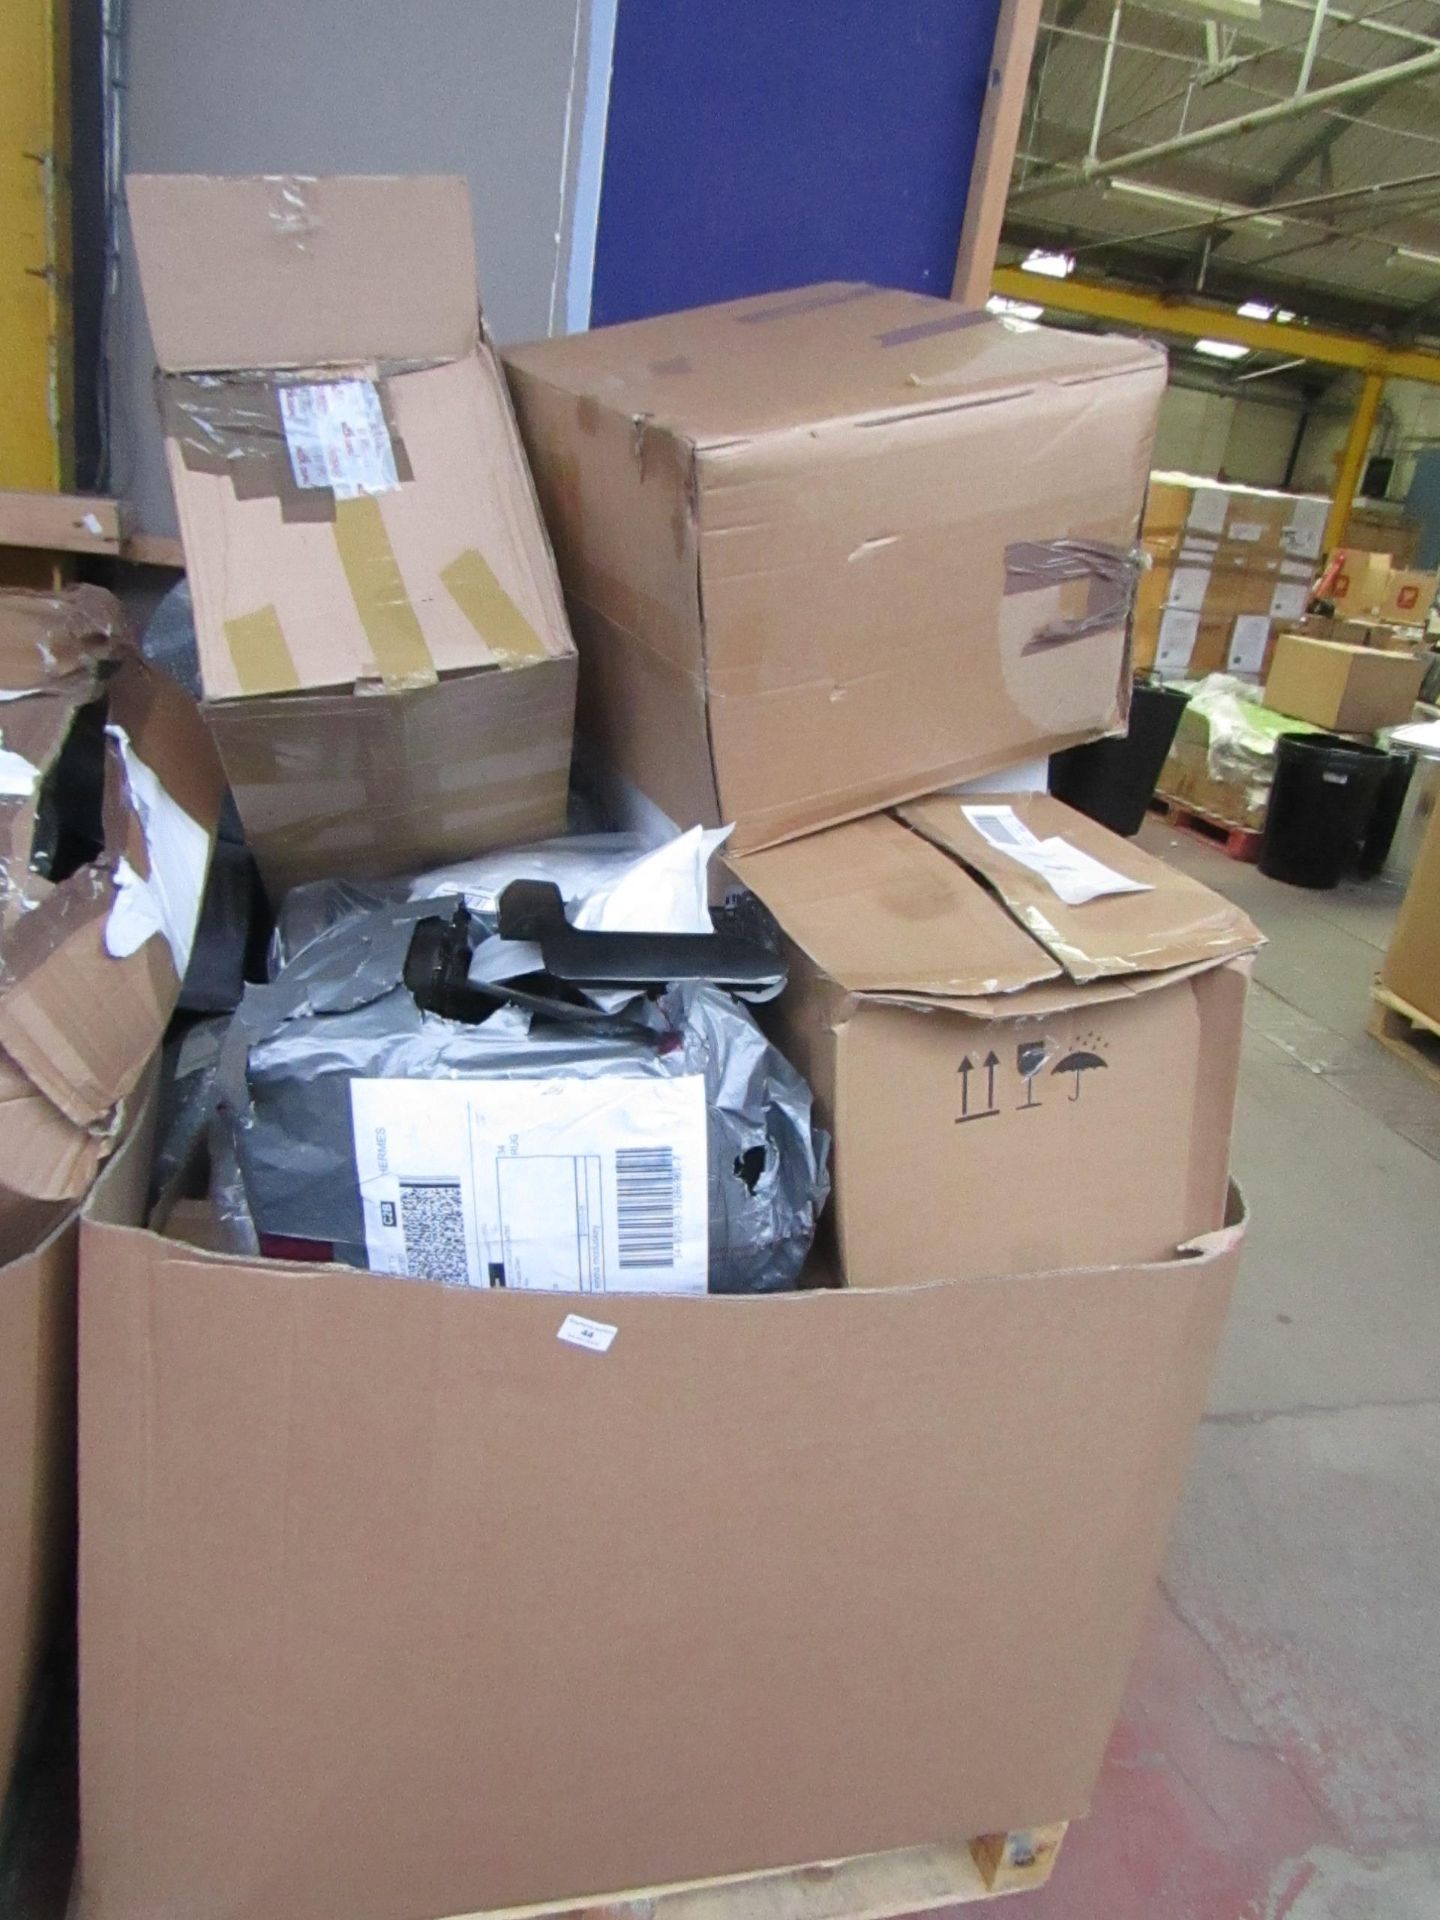 | 1X | PALLET OF APPROX 15 ITEMS WHICH LOOKS TO CONTAIN PRESSURE COOKERS, AIR FRYER COOKERS AND